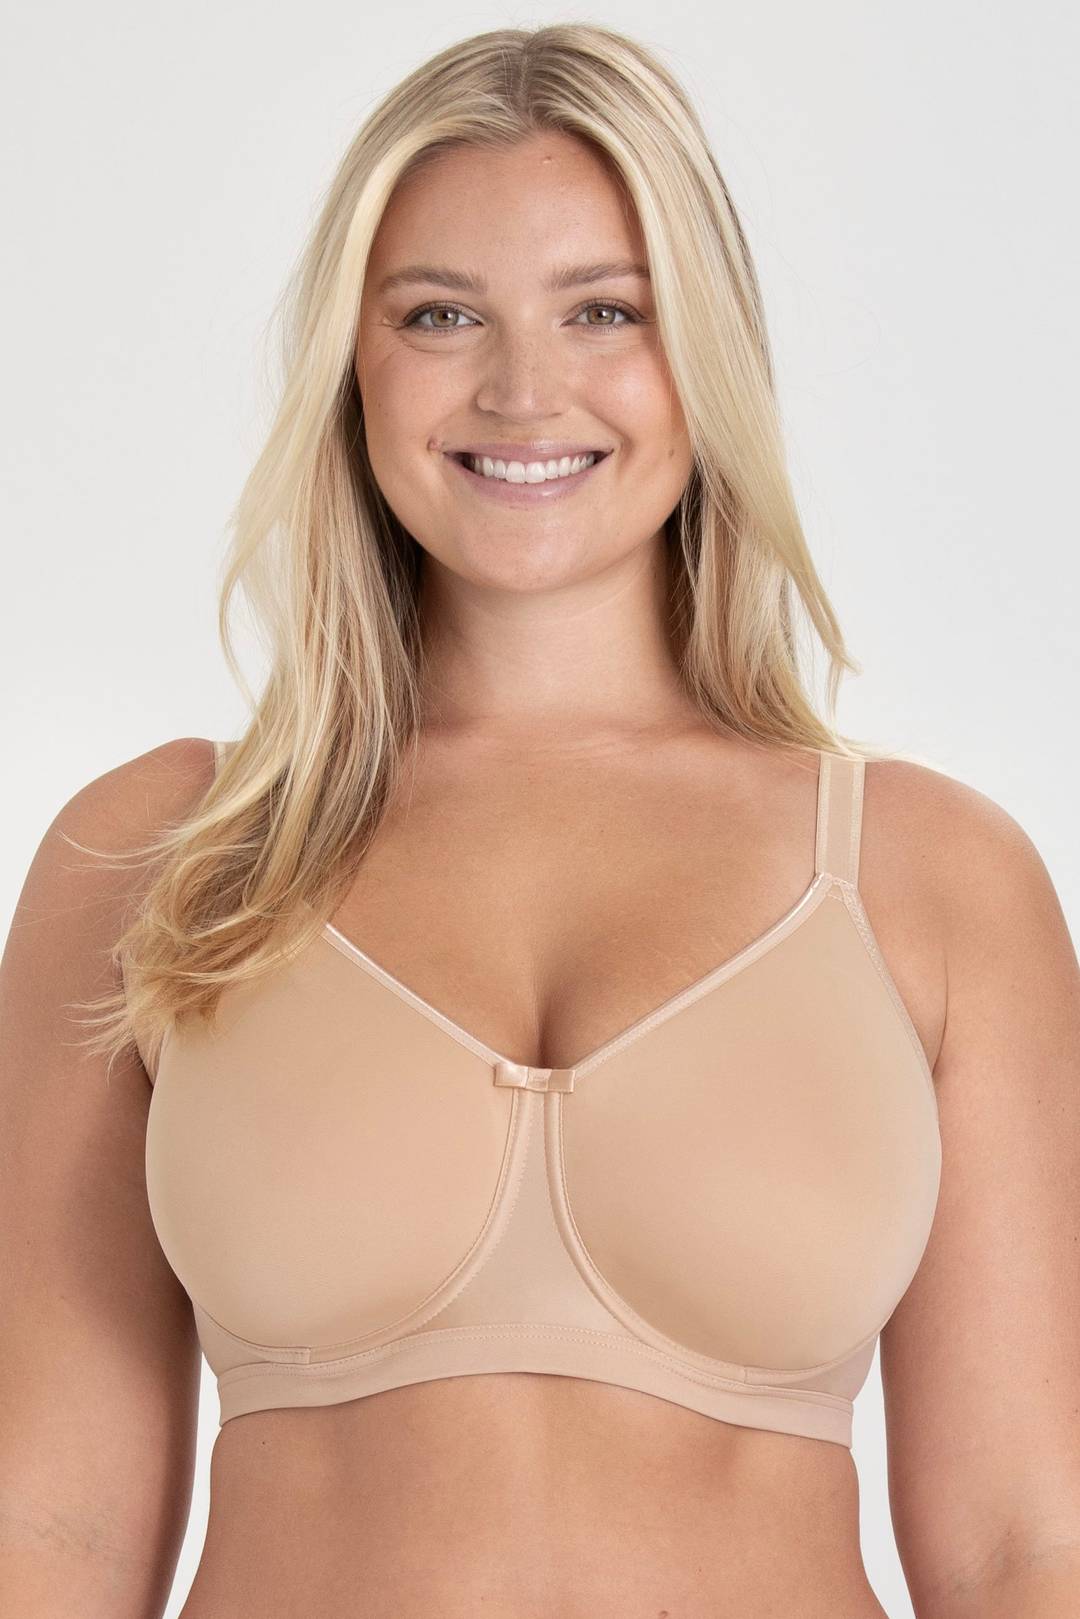 Confident - Airy spacer material that breathes - Miss Mary